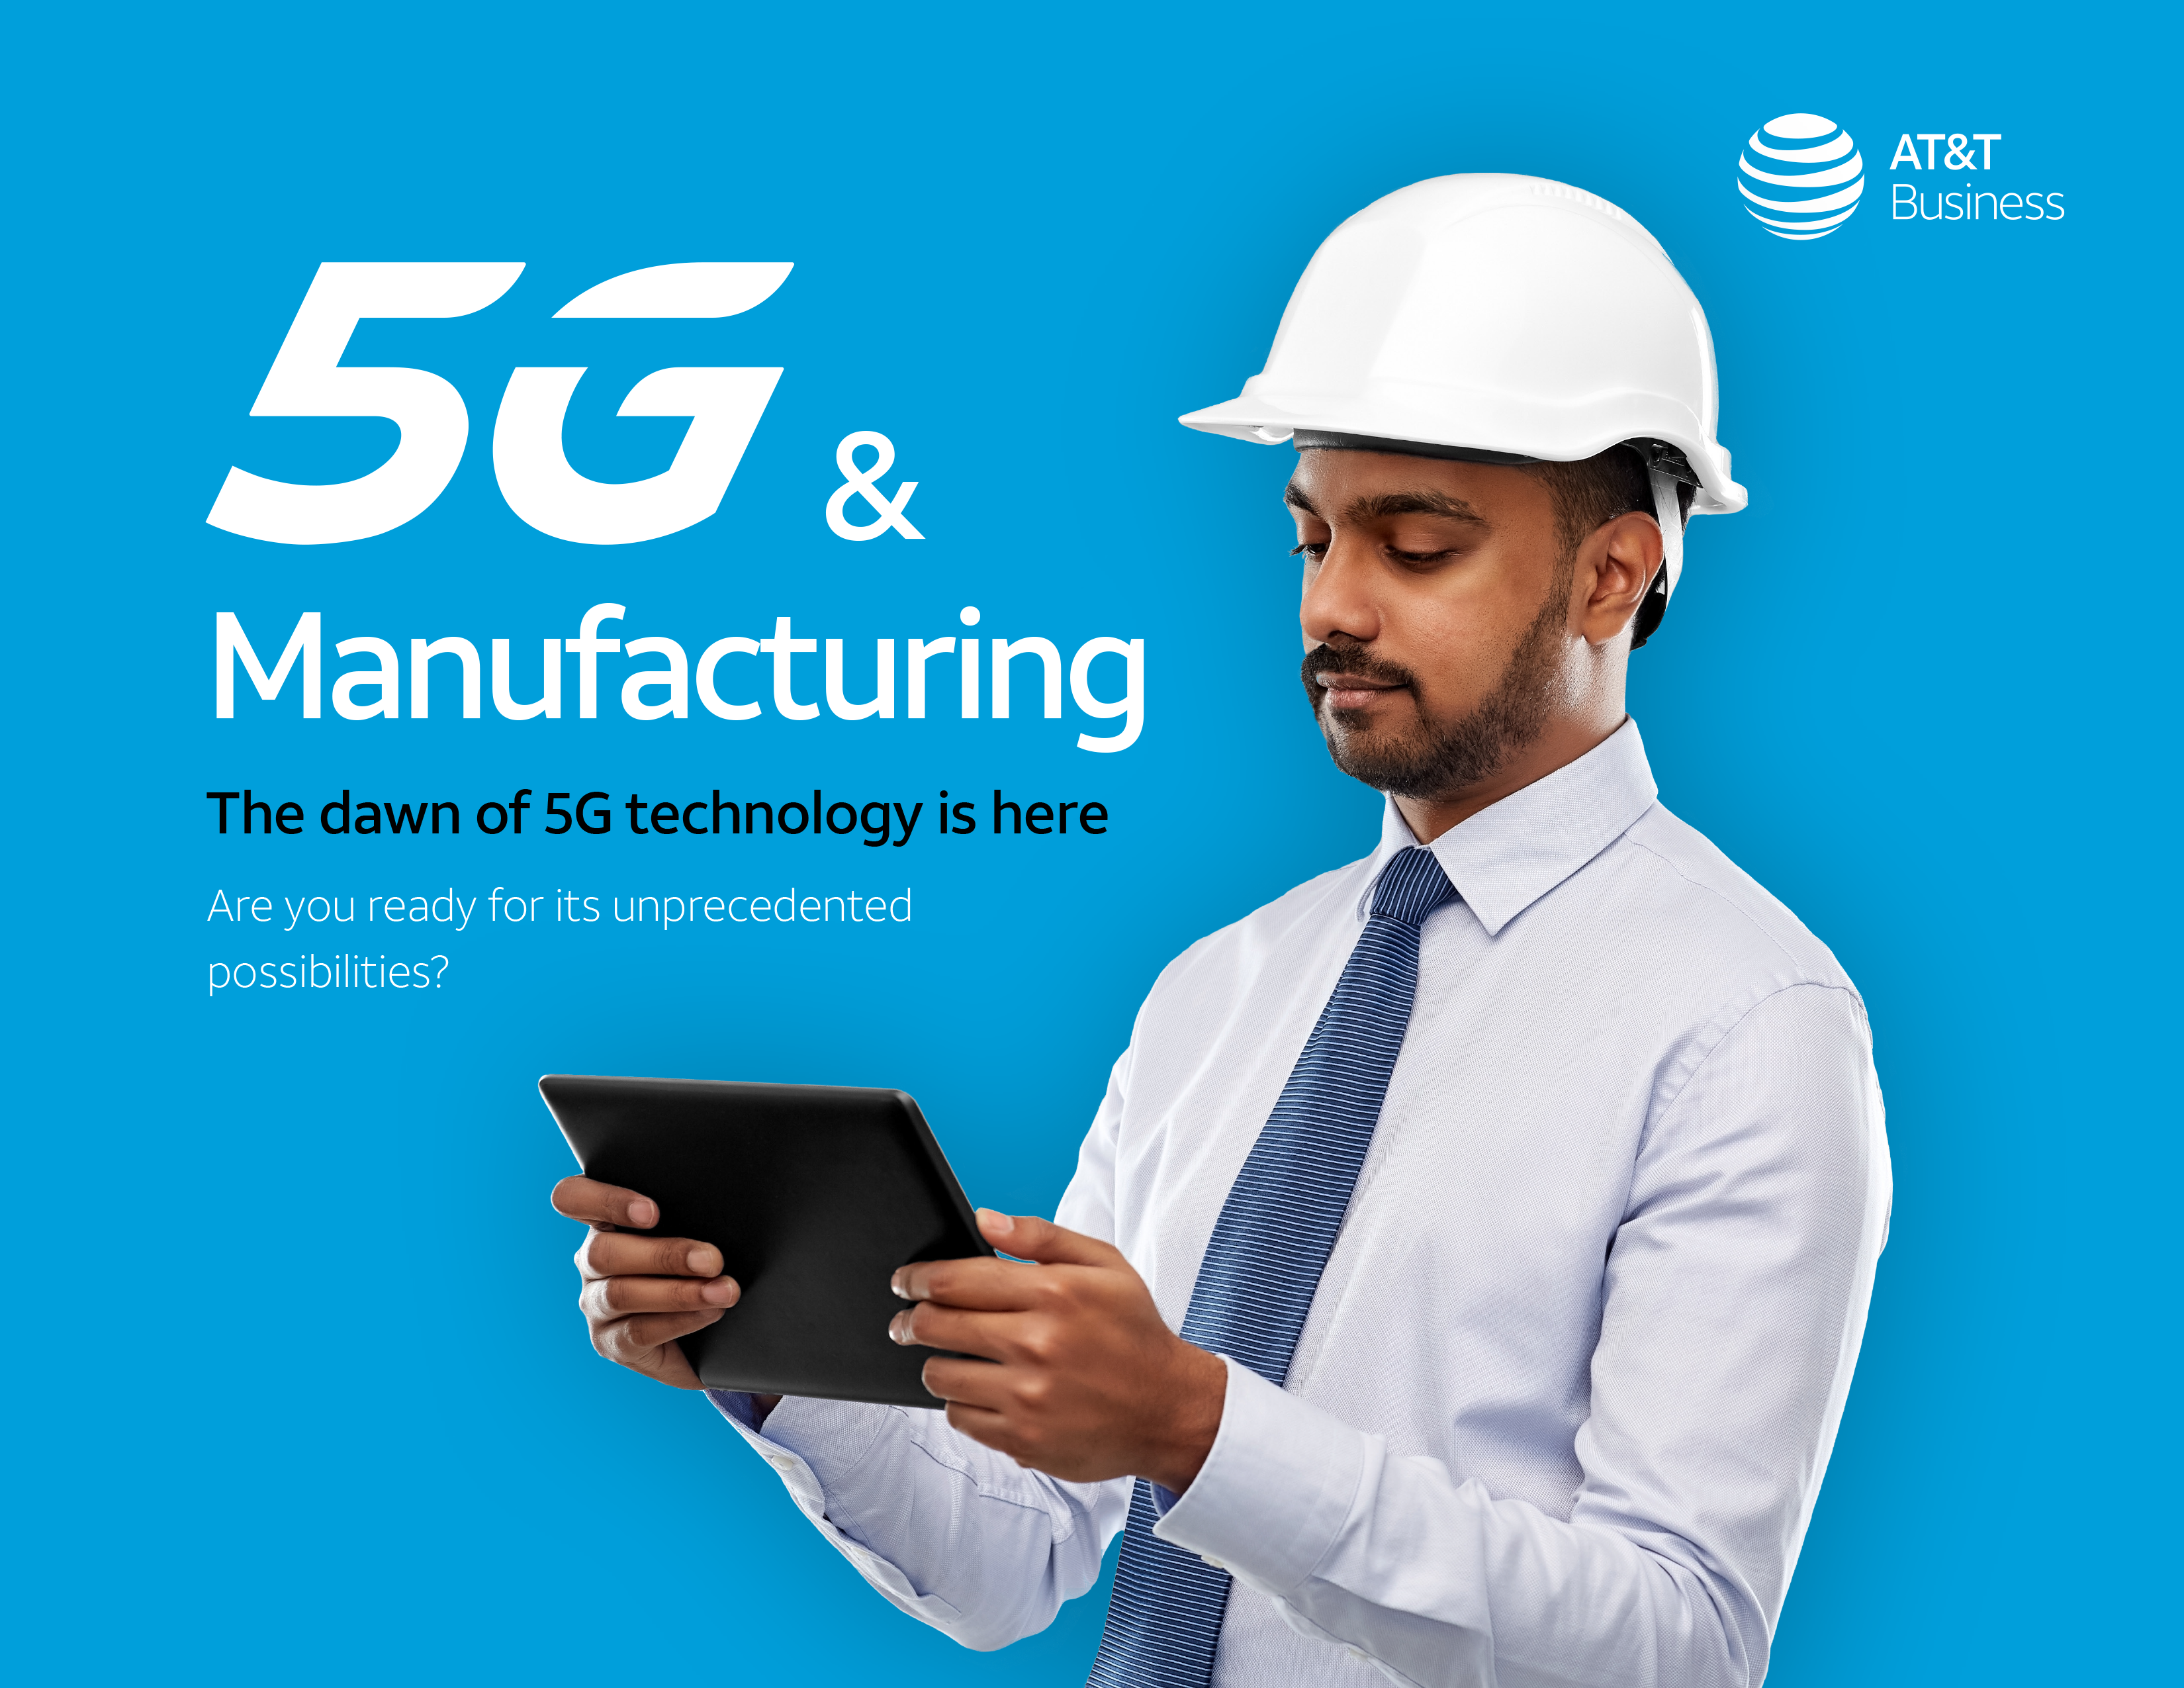 5G & Manufacturing: The Dawn of 5G Technology is Here image